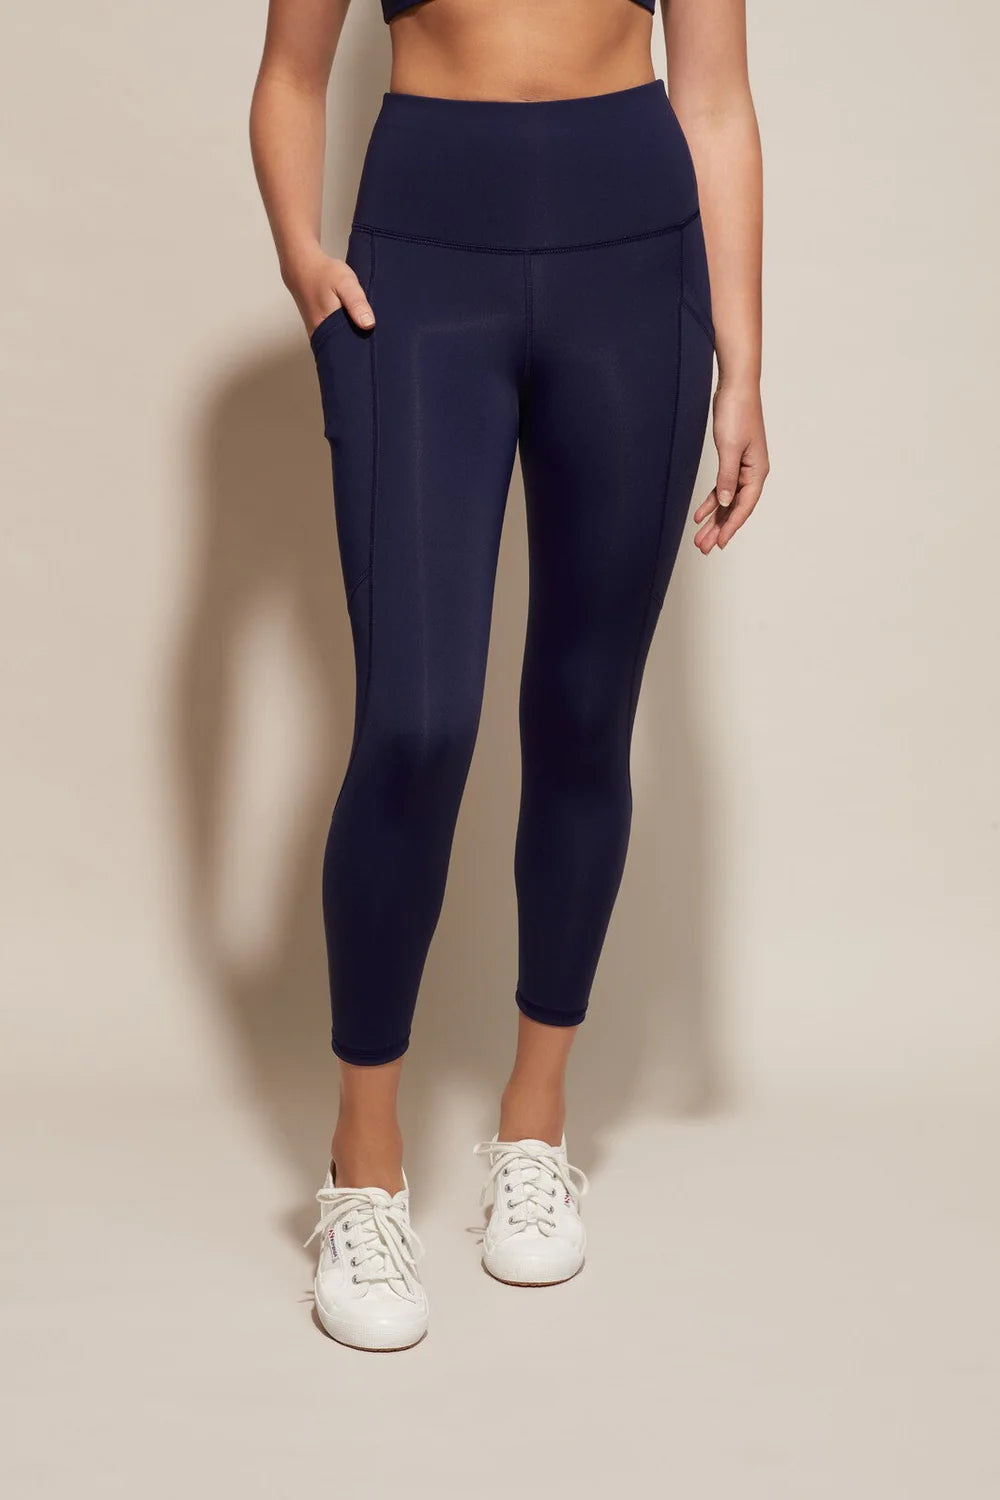 DK Active Essential Tight Navy 7/8 Small